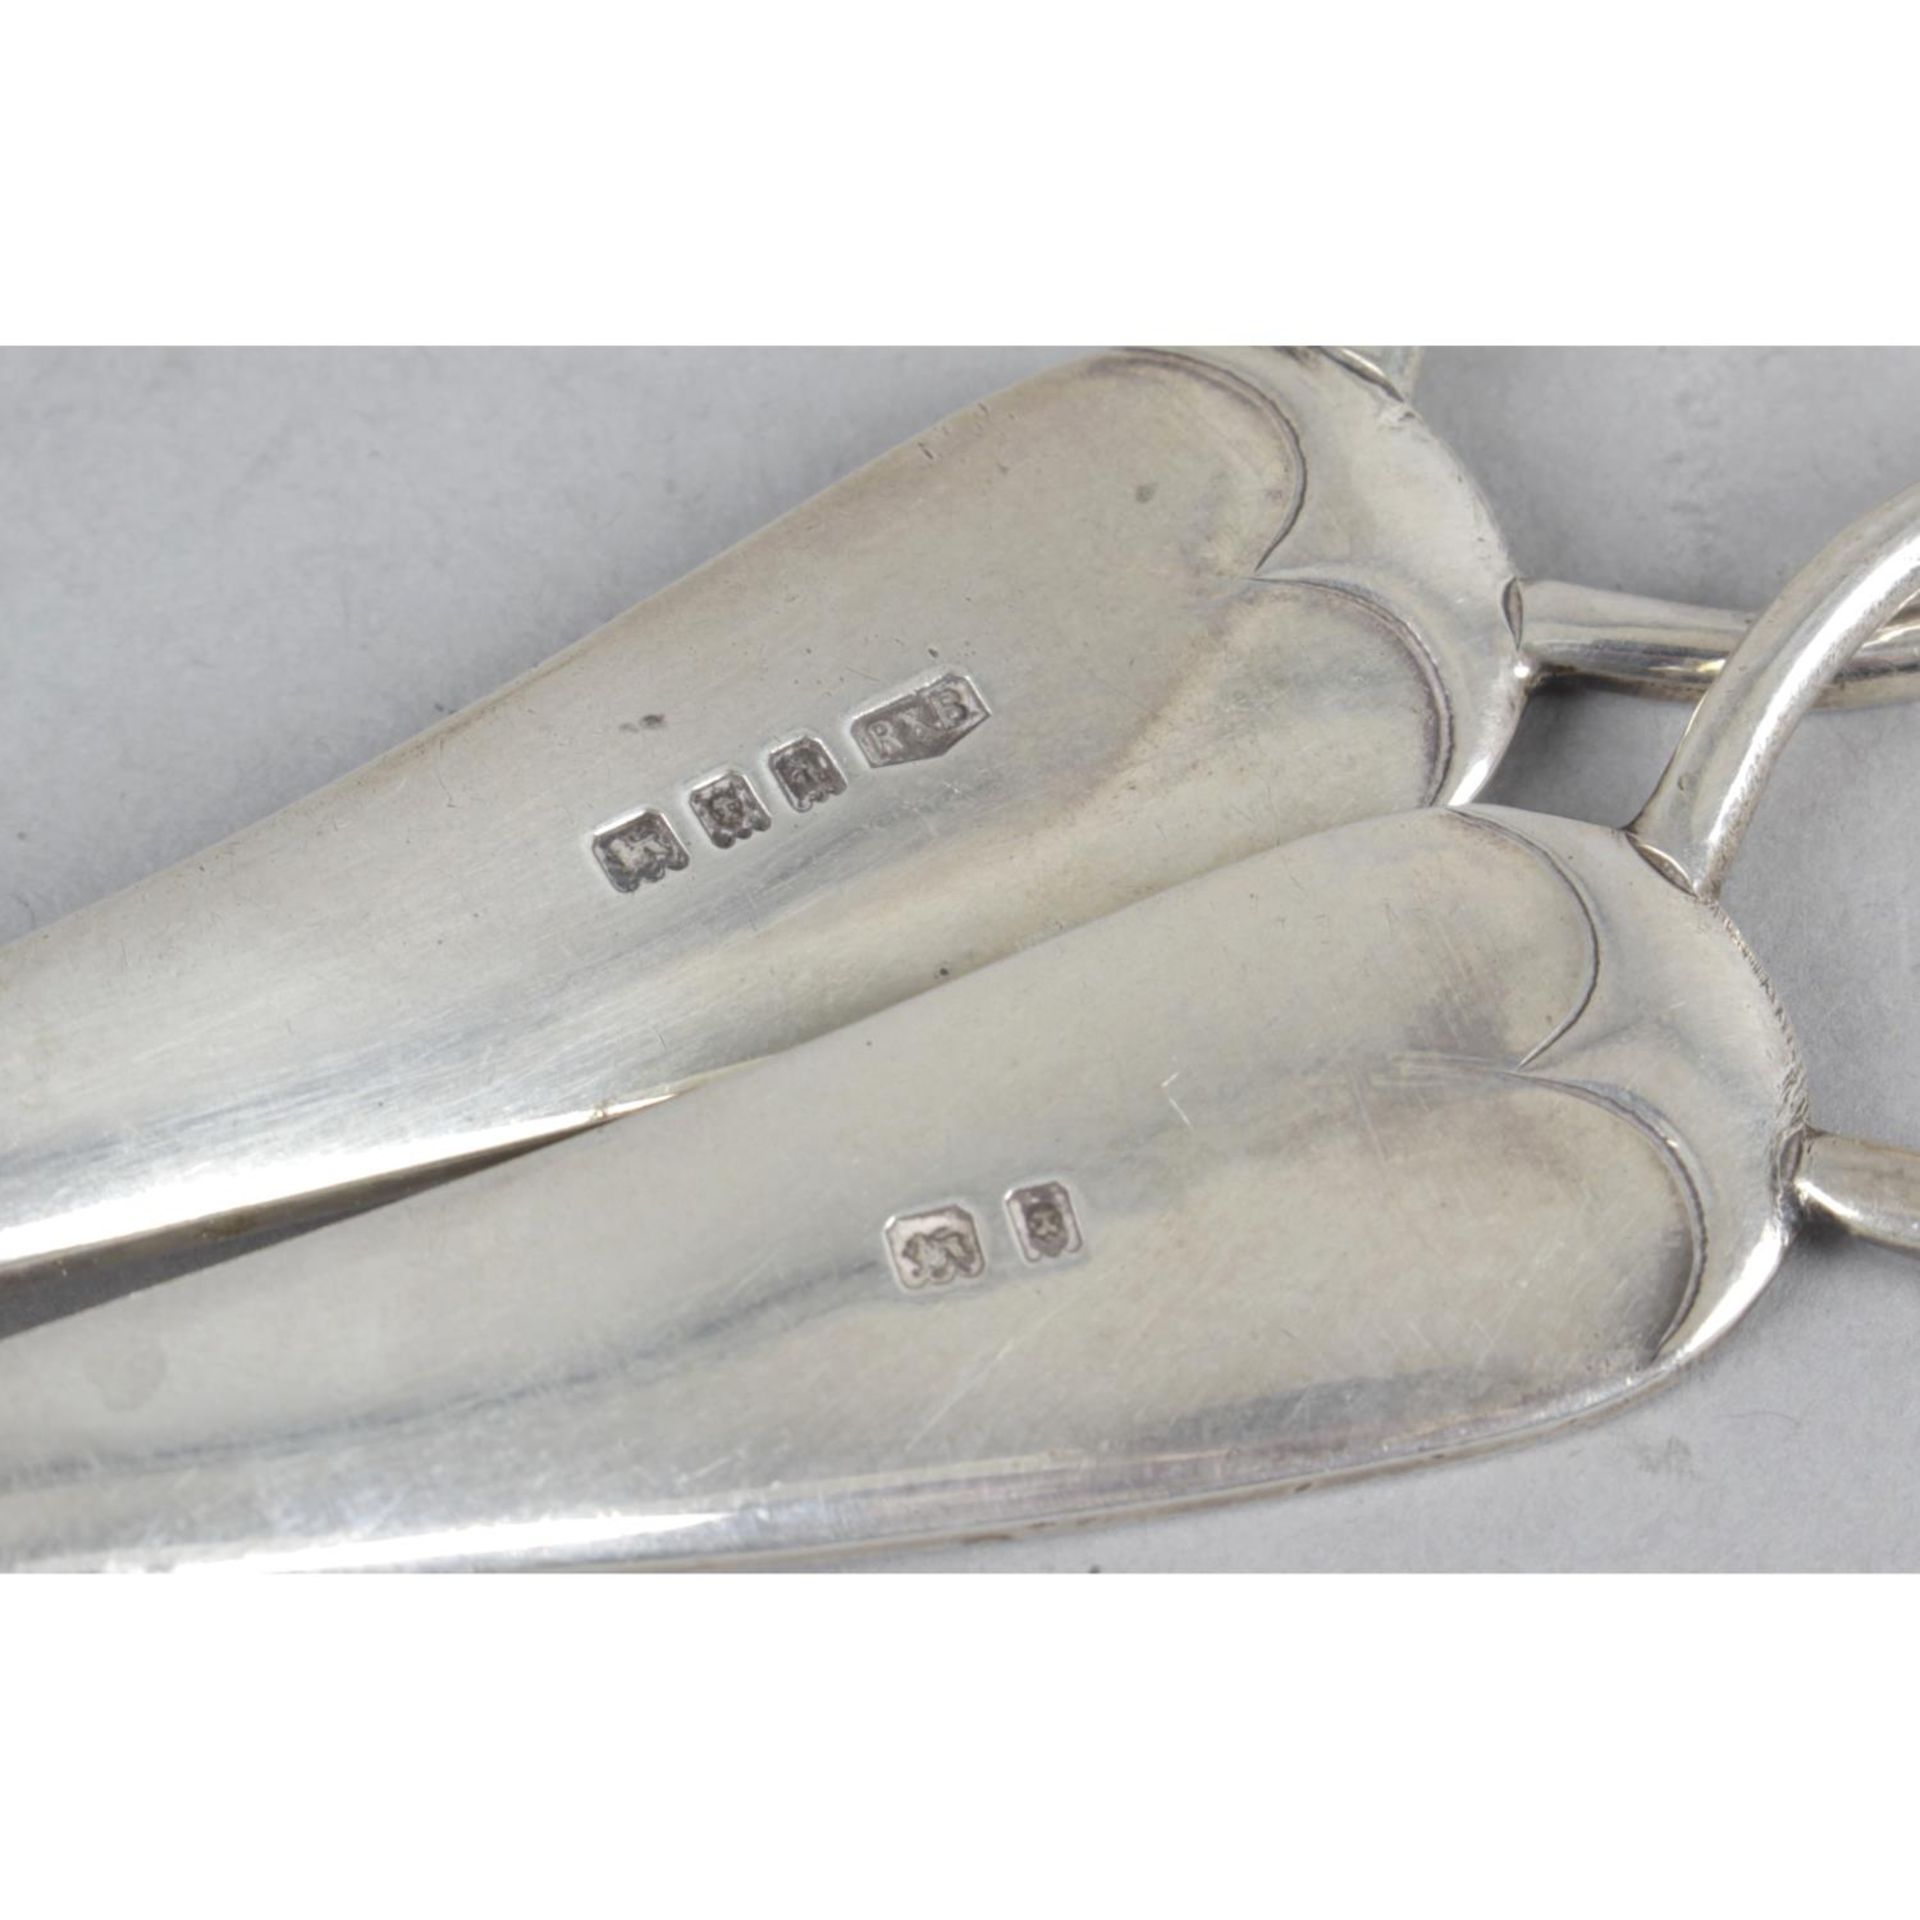 An Edwardian silver pair of grape scissors of plain design with loop handles - stamped Rd 483718. - Image 2 of 2